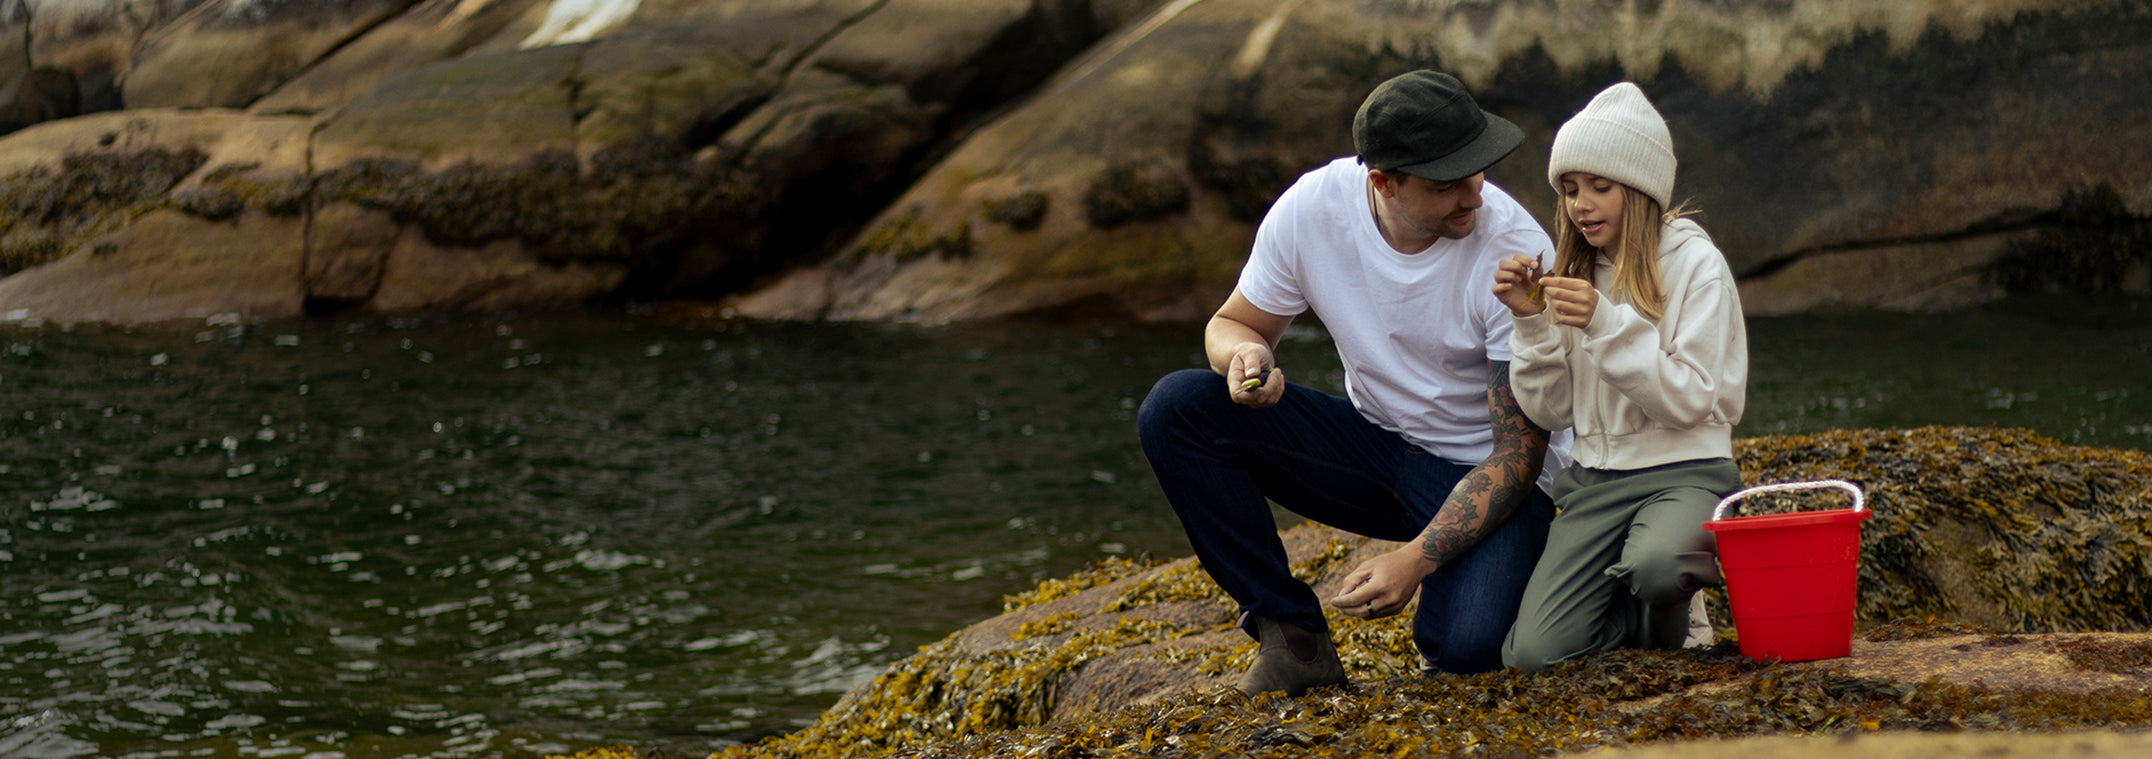 A man and a girl are crouching on a rocky shore by the water, examining items in their hands. The man wears a white t-shirt, jeans, and a cap, while the girl is dressed in a beanie, jacket, and pants. 